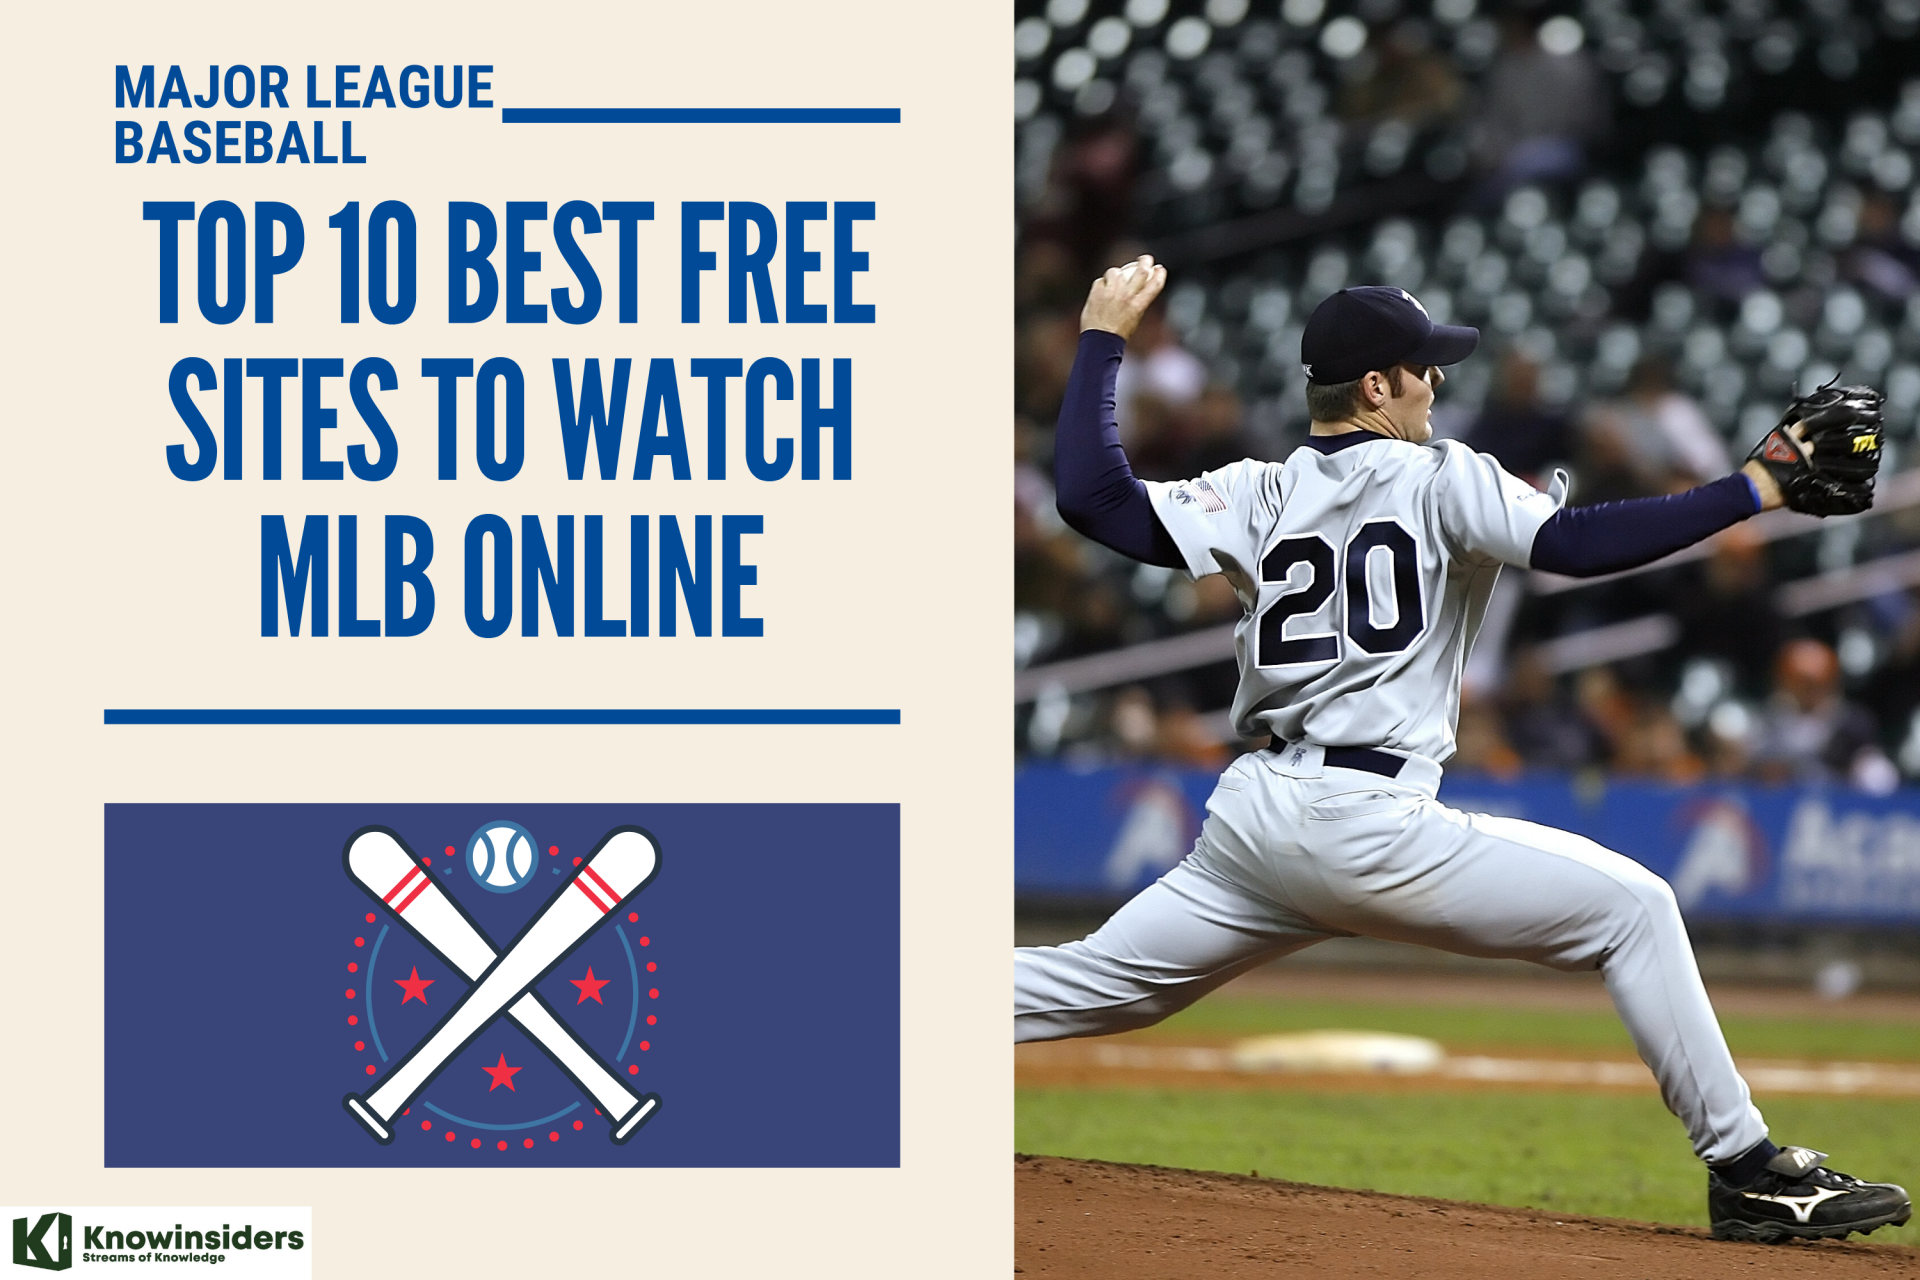 Top 10 Best FREE Sites to Watch MLB Online